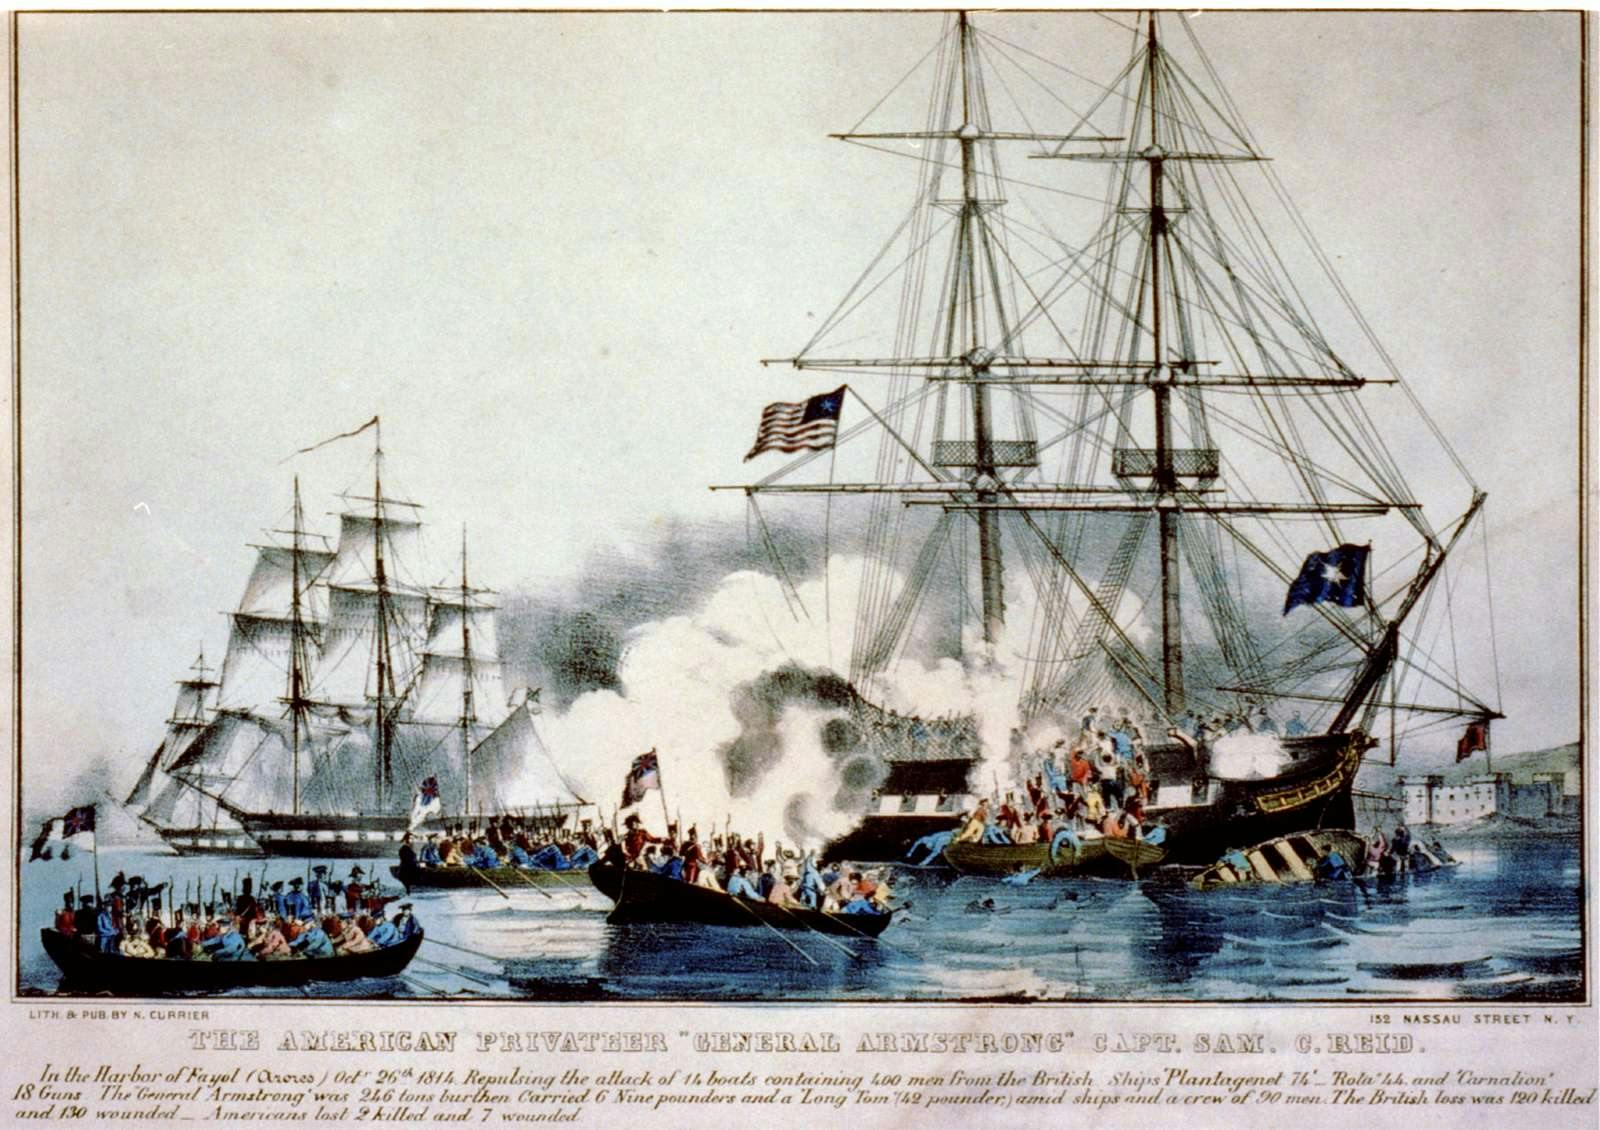 Print shows the American privateer “General Armstrong” firing on British boats sent from HBM Carnation to capture her.